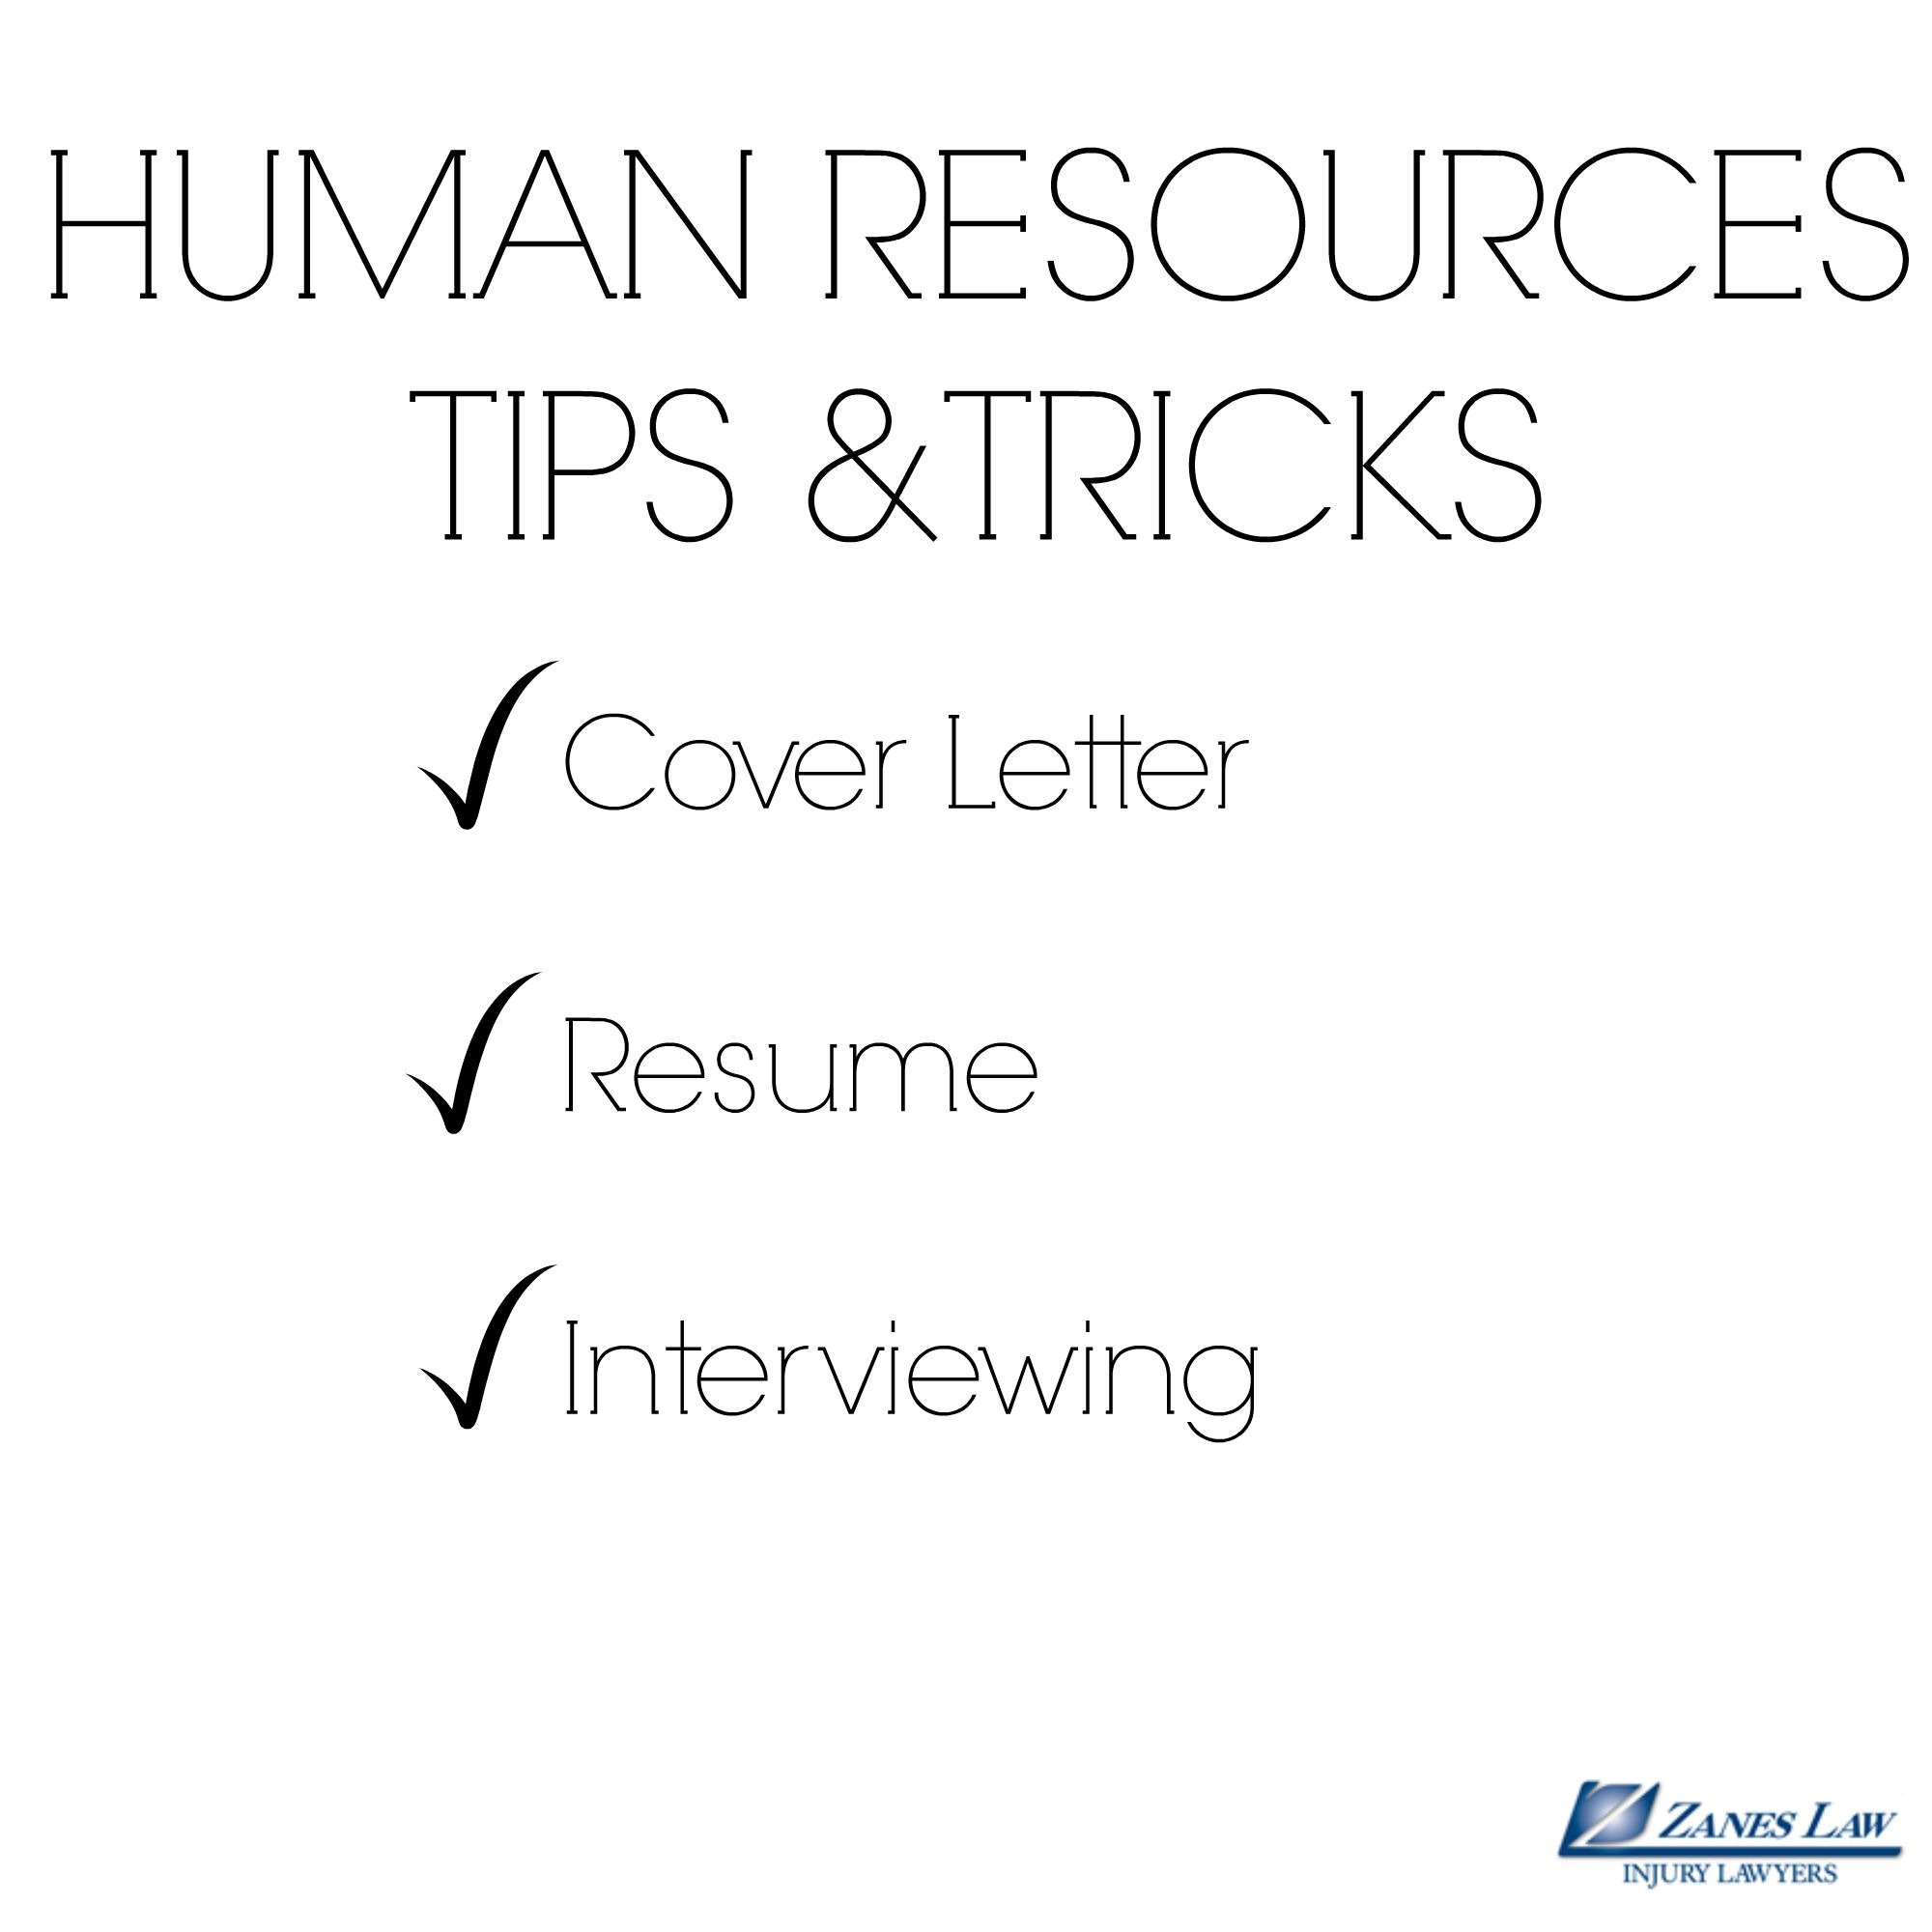 Human Resources At Zanes Law Are Here to Serve YOU